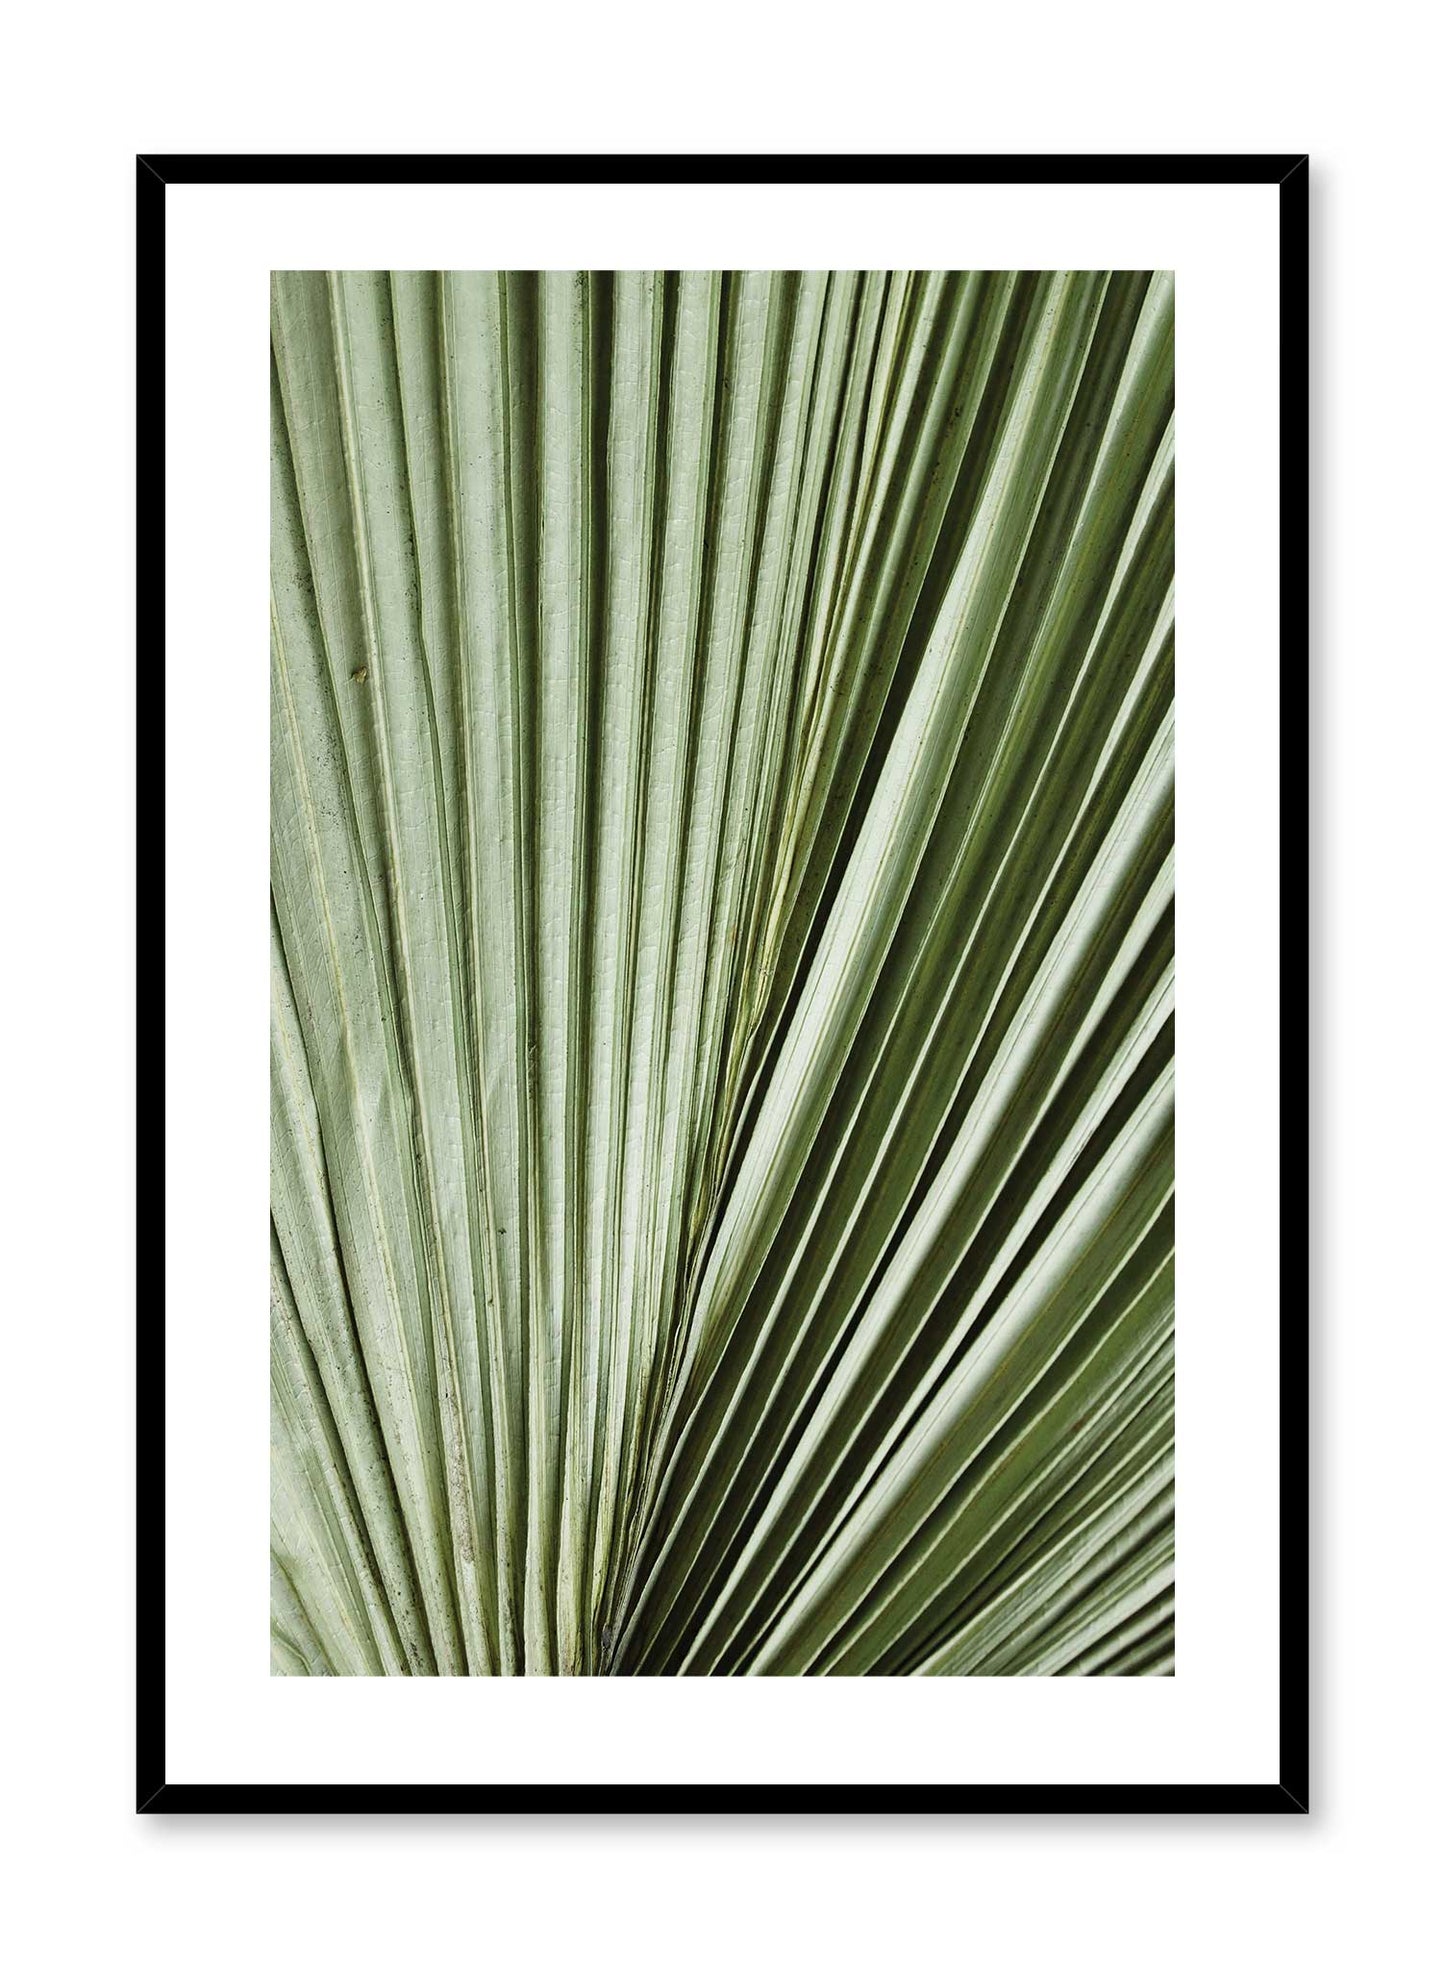 Nature's Accordion is a minimalist photography of a very close-up view of a leaf of palm tree leaf showing off its fine lines and details by Opposite Wall.